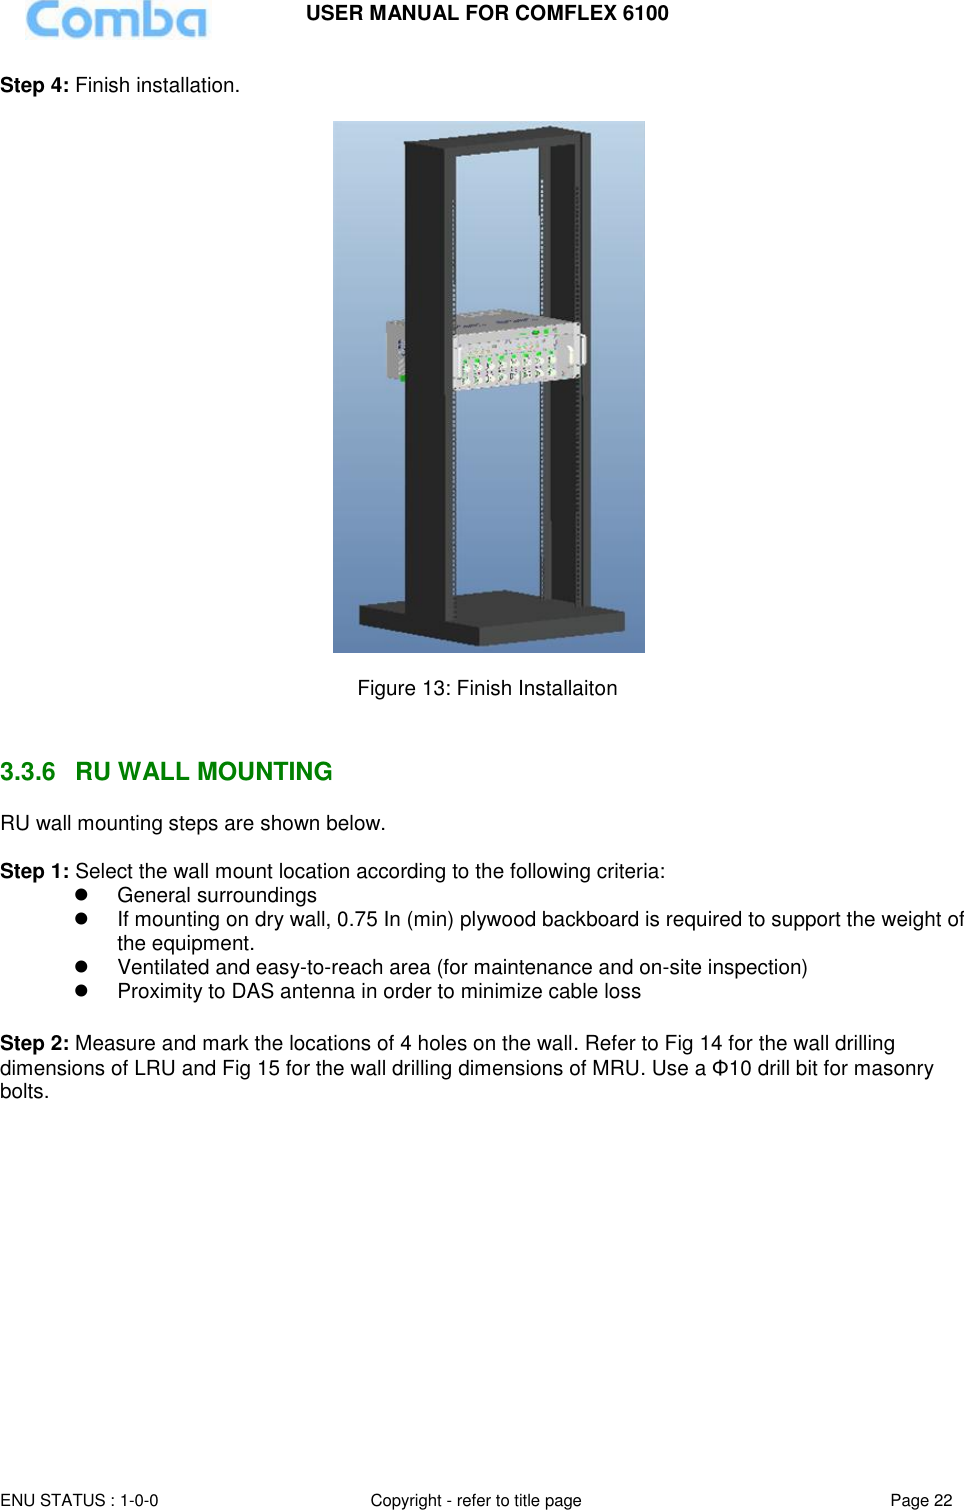 USER MANUAL FOR COMFLEX 6100 ENU STATUS : 1-0-0 Copyright - refer to title page Page 22  Step 4: Finish installation.    Figure 13: Finish Installaiton   3.3.6  RU WALL MOUNTING RU wall mounting steps are shown below.  Step 1: Select the wall mount location according to the following criteria:   General surroundings   If mounting on dry wall, 0.75 In (min) plywood backboard is required to support the weight of the equipment.   Ventilated and easy-to-reach area (for maintenance and on-site inspection)   Proximity to DAS antenna in order to minimize cable loss  Step 2: Measure and mark the locations of 4 holes on the wall. Refer to Fig 14 for the wall drilling dimensions of LRU and Fig 15 for the wall drilling dimensions of MRU. Use a Φ10 drill bit for masonry bolts.             